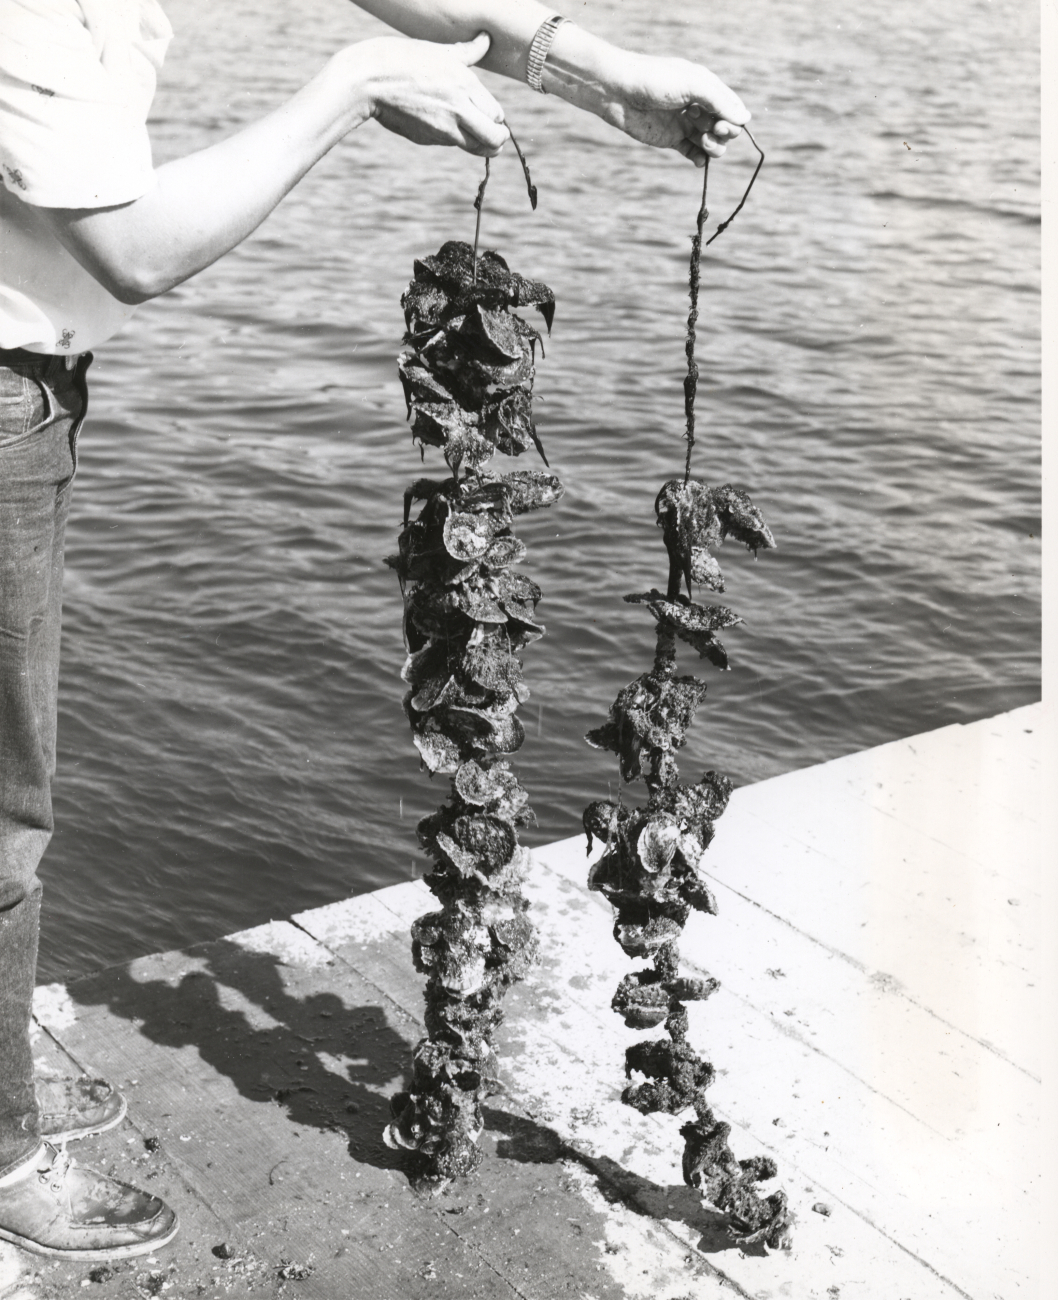 Oysters growing on strings which had been suspended from a raft